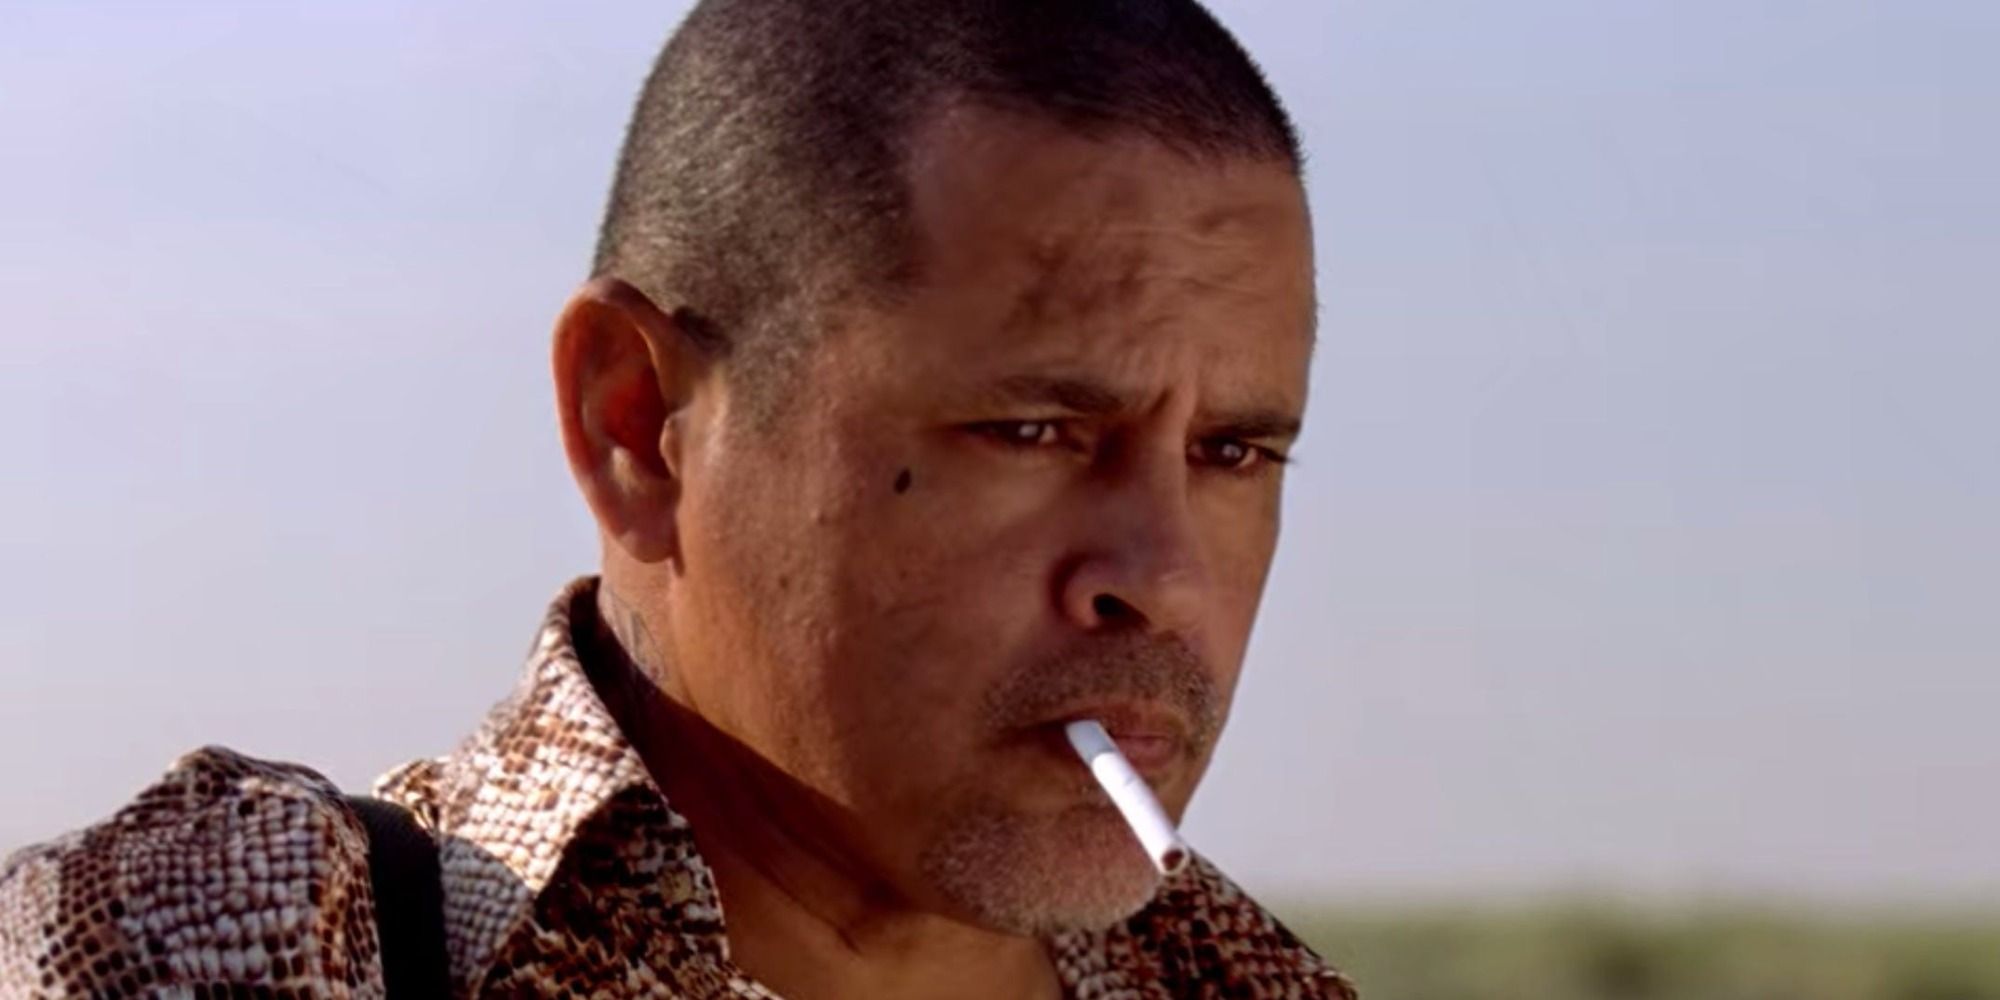 Tuco smoking a cigarette in Breaking Bad